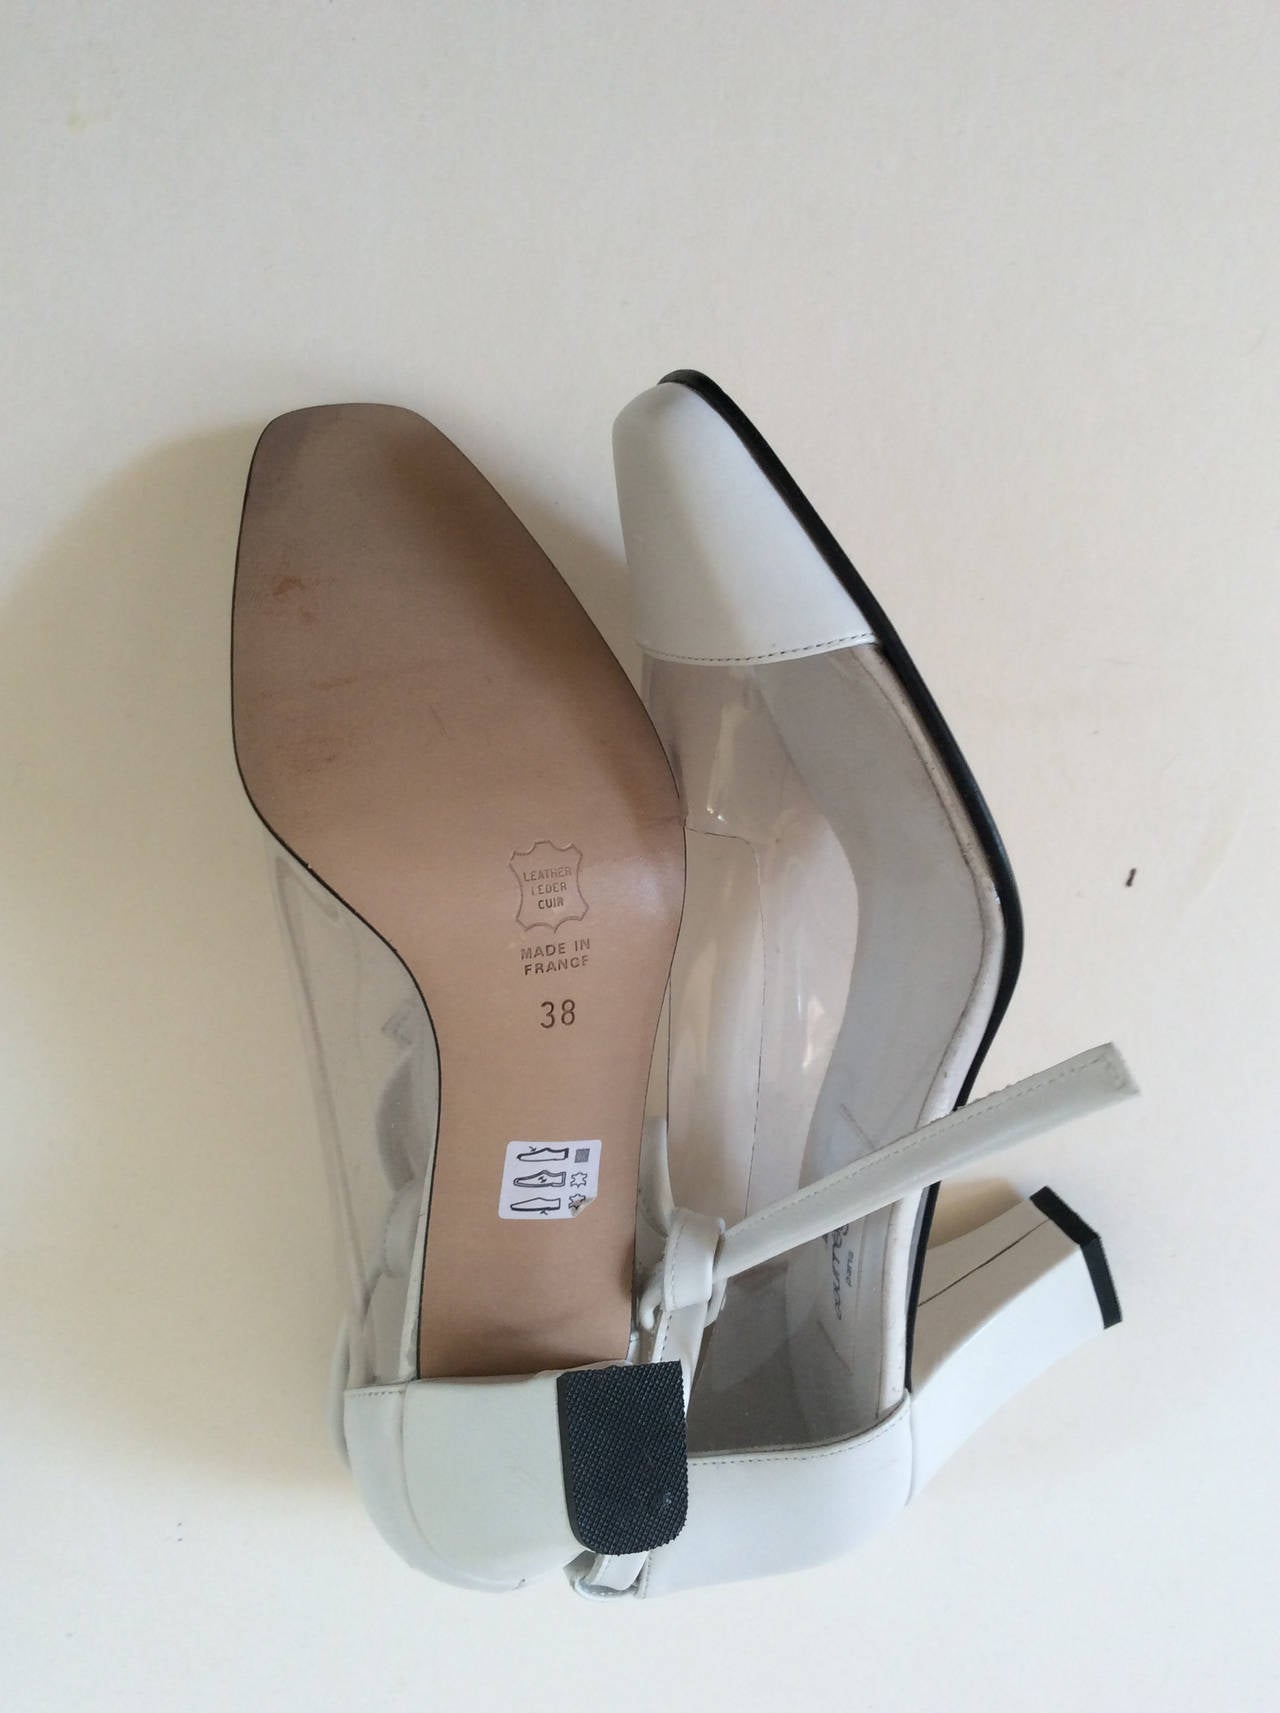 New Courreges Shoes - Size 38 - White leather / Clear Plastic with ...